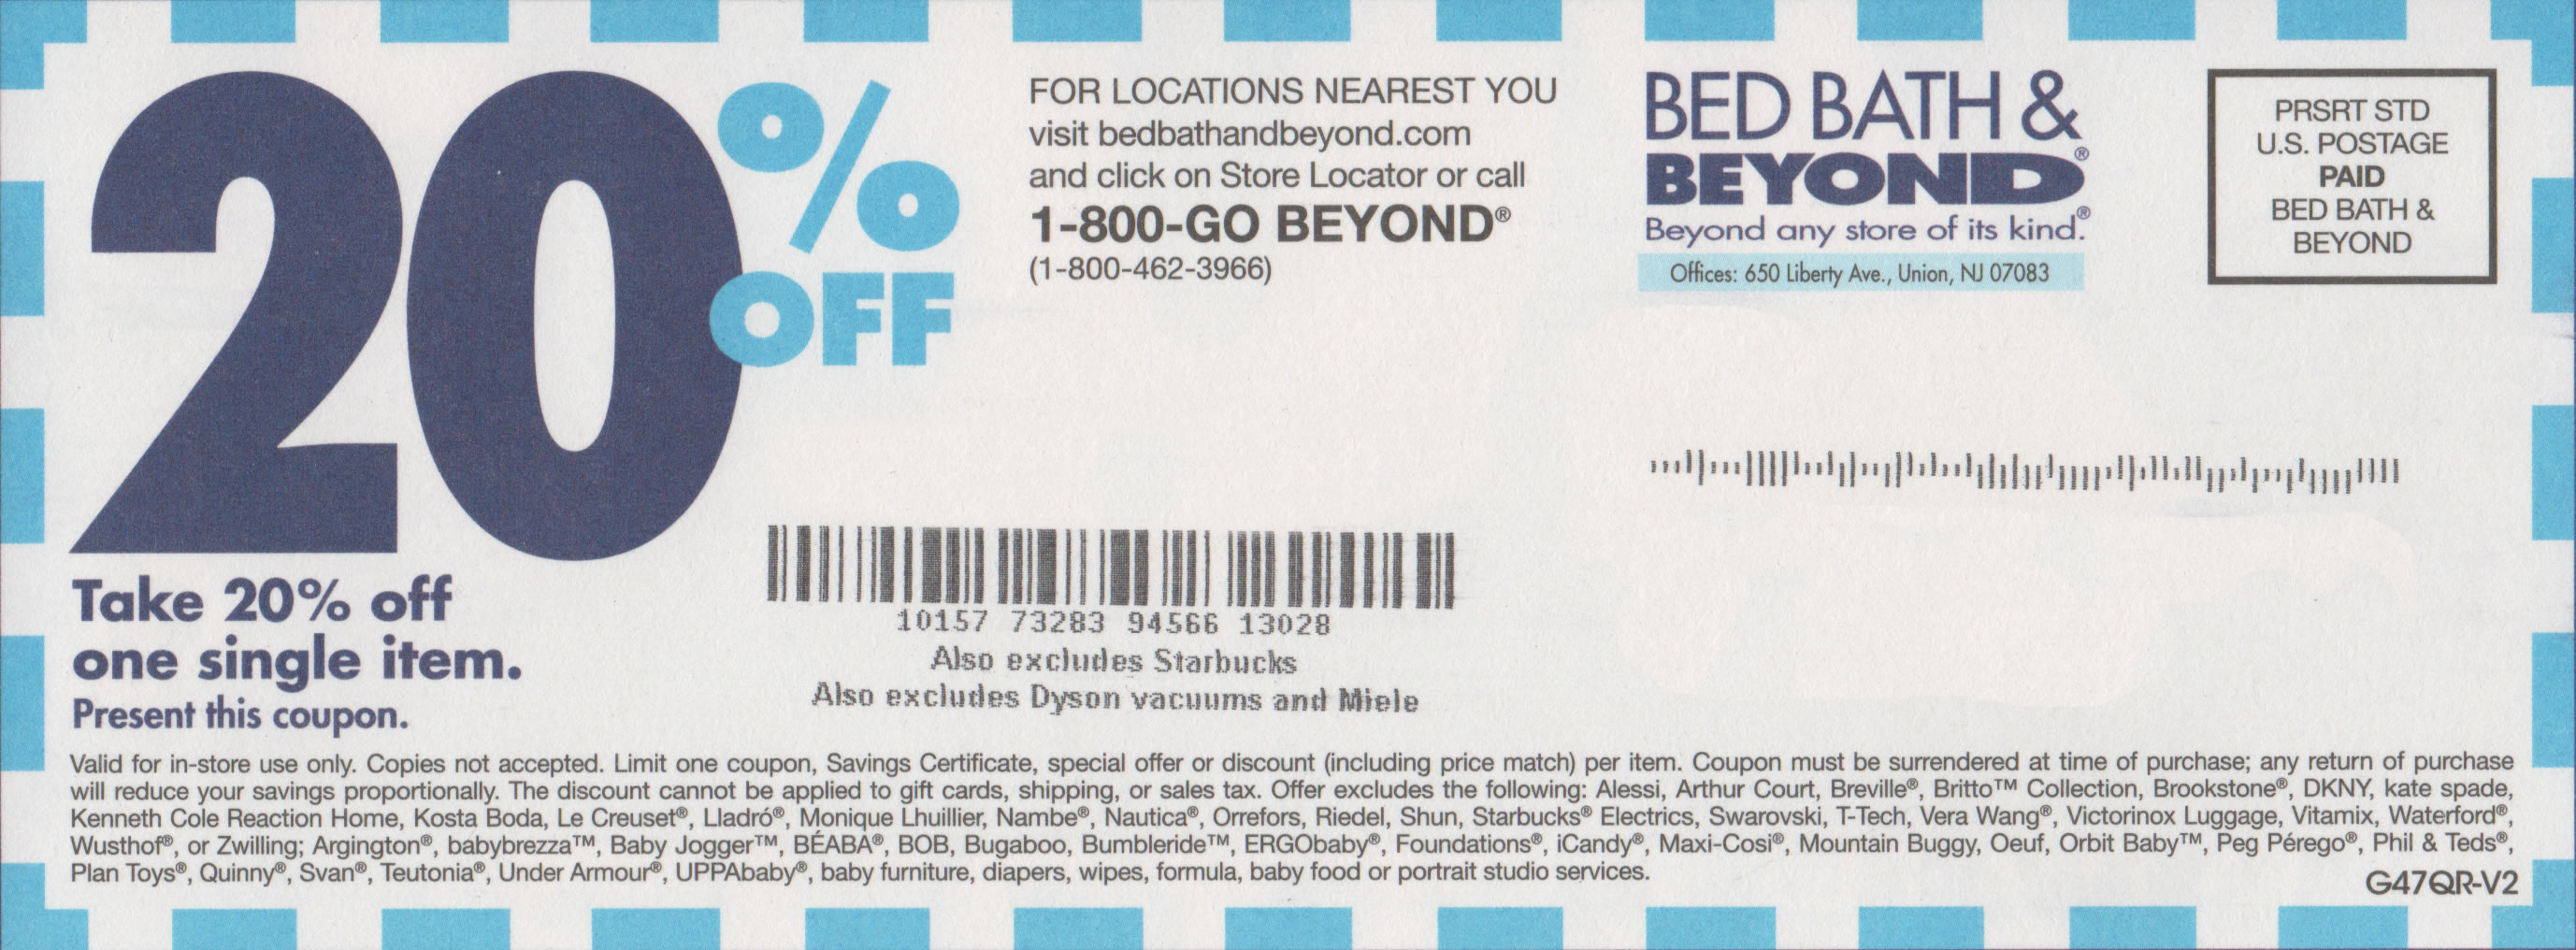 Bed Bath And Beyond Printable Coupons $5 Off